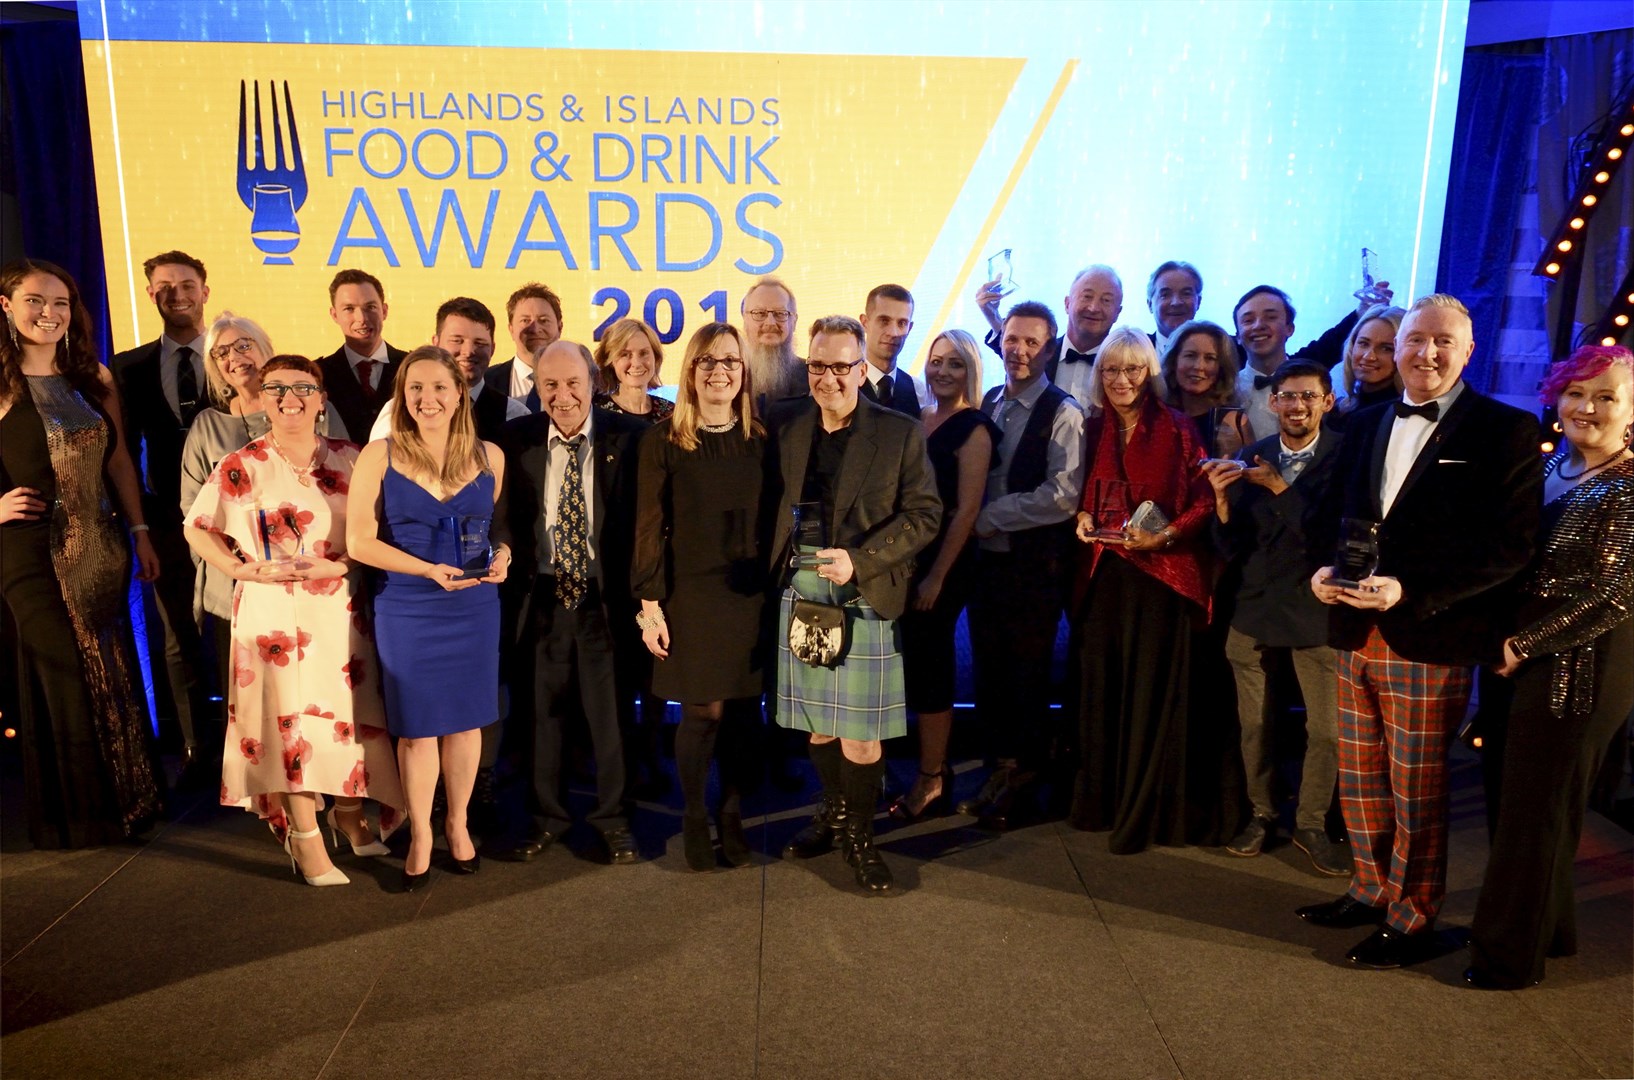 Award winners on stage at the Highlands & Islands Food & Drink Awards 2019, held at the Kingsmills Hotel in Inverness. Picture: James MacKenzie.